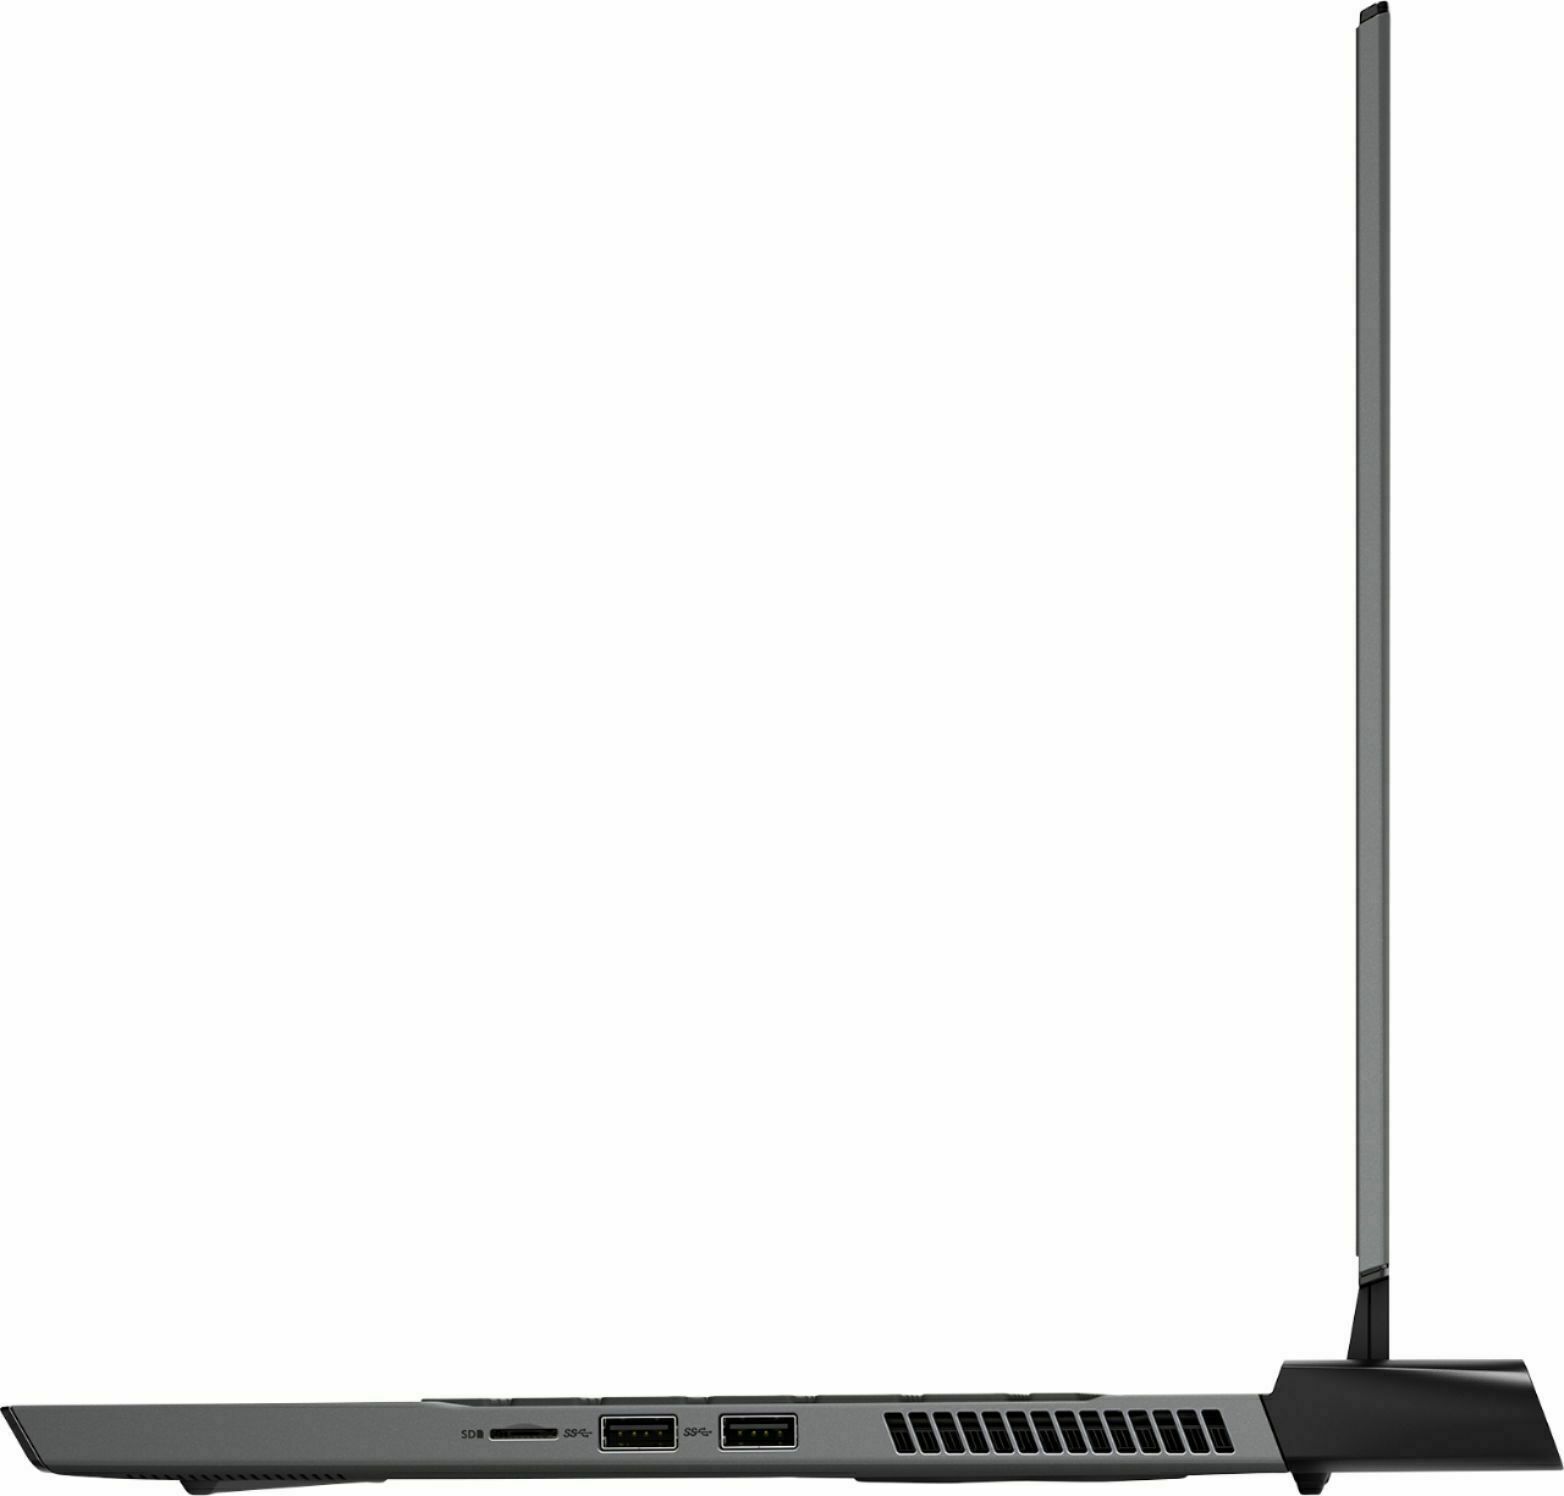 Alienware m15 R3 15.6″ Gaming Laptop computer i7-10750H 16 GB, RTX 2070 ...